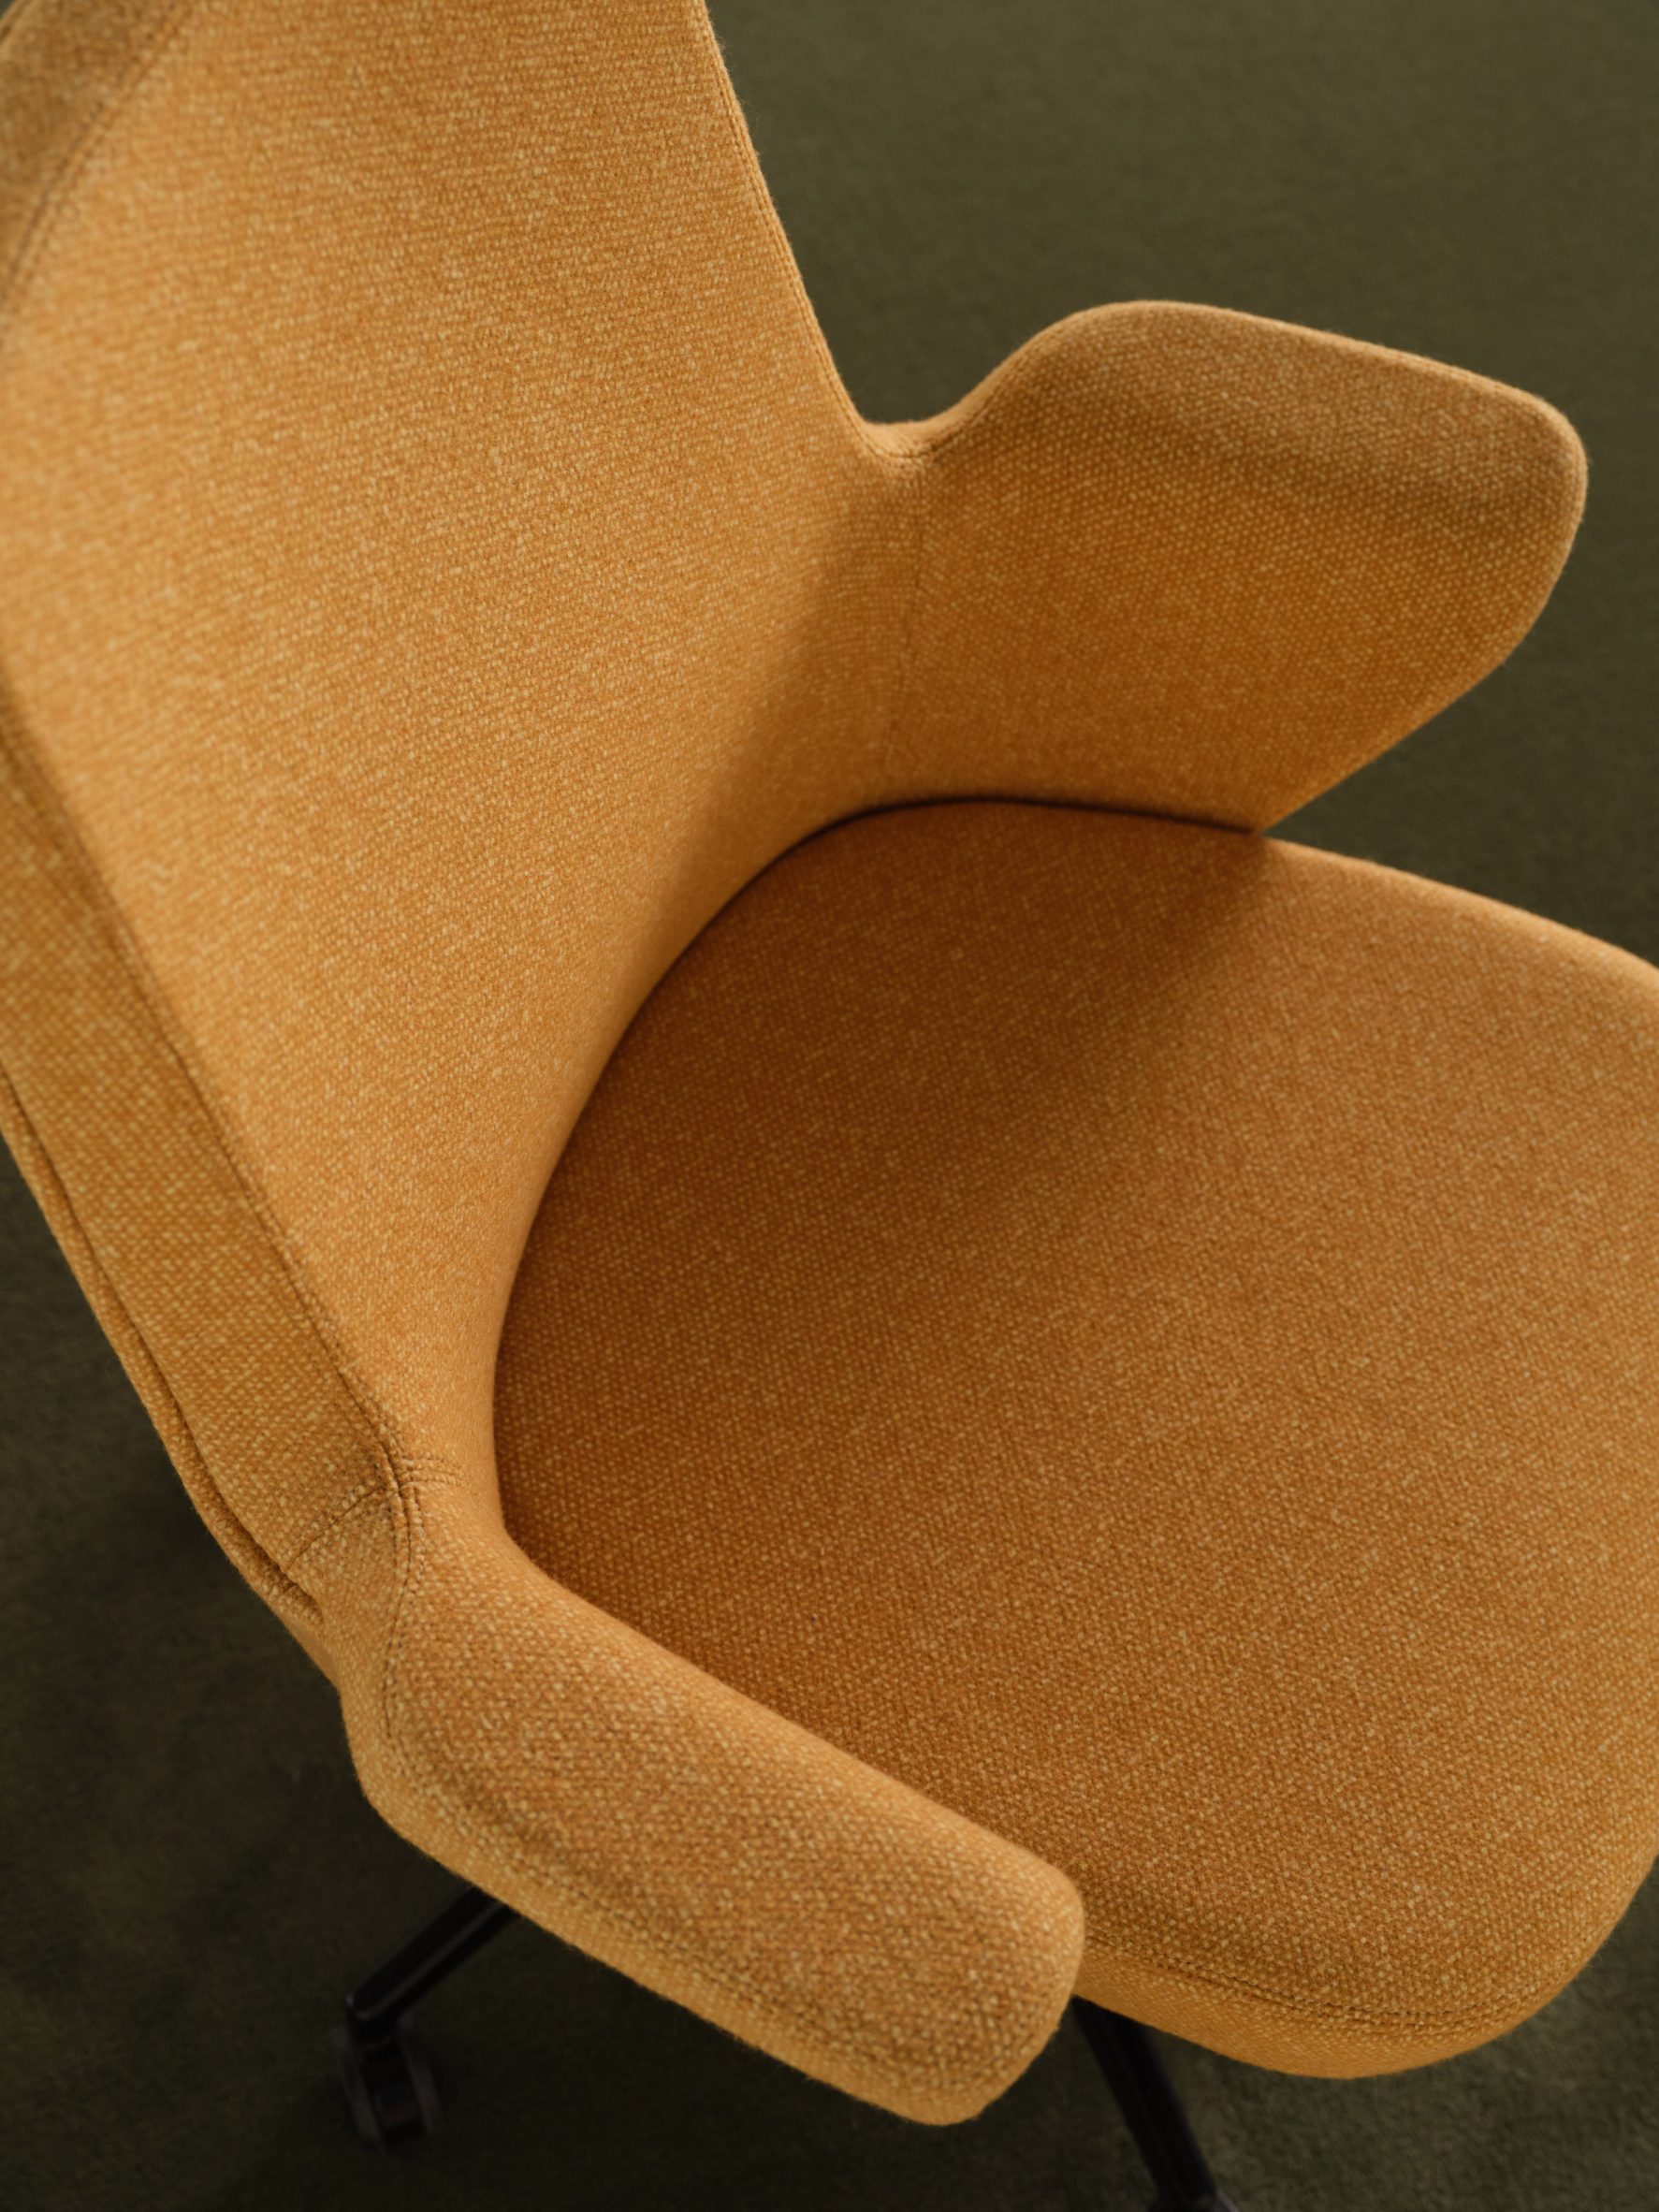 Summa chair from the Meeting Collection by Humanscale in Kvadrat fabric